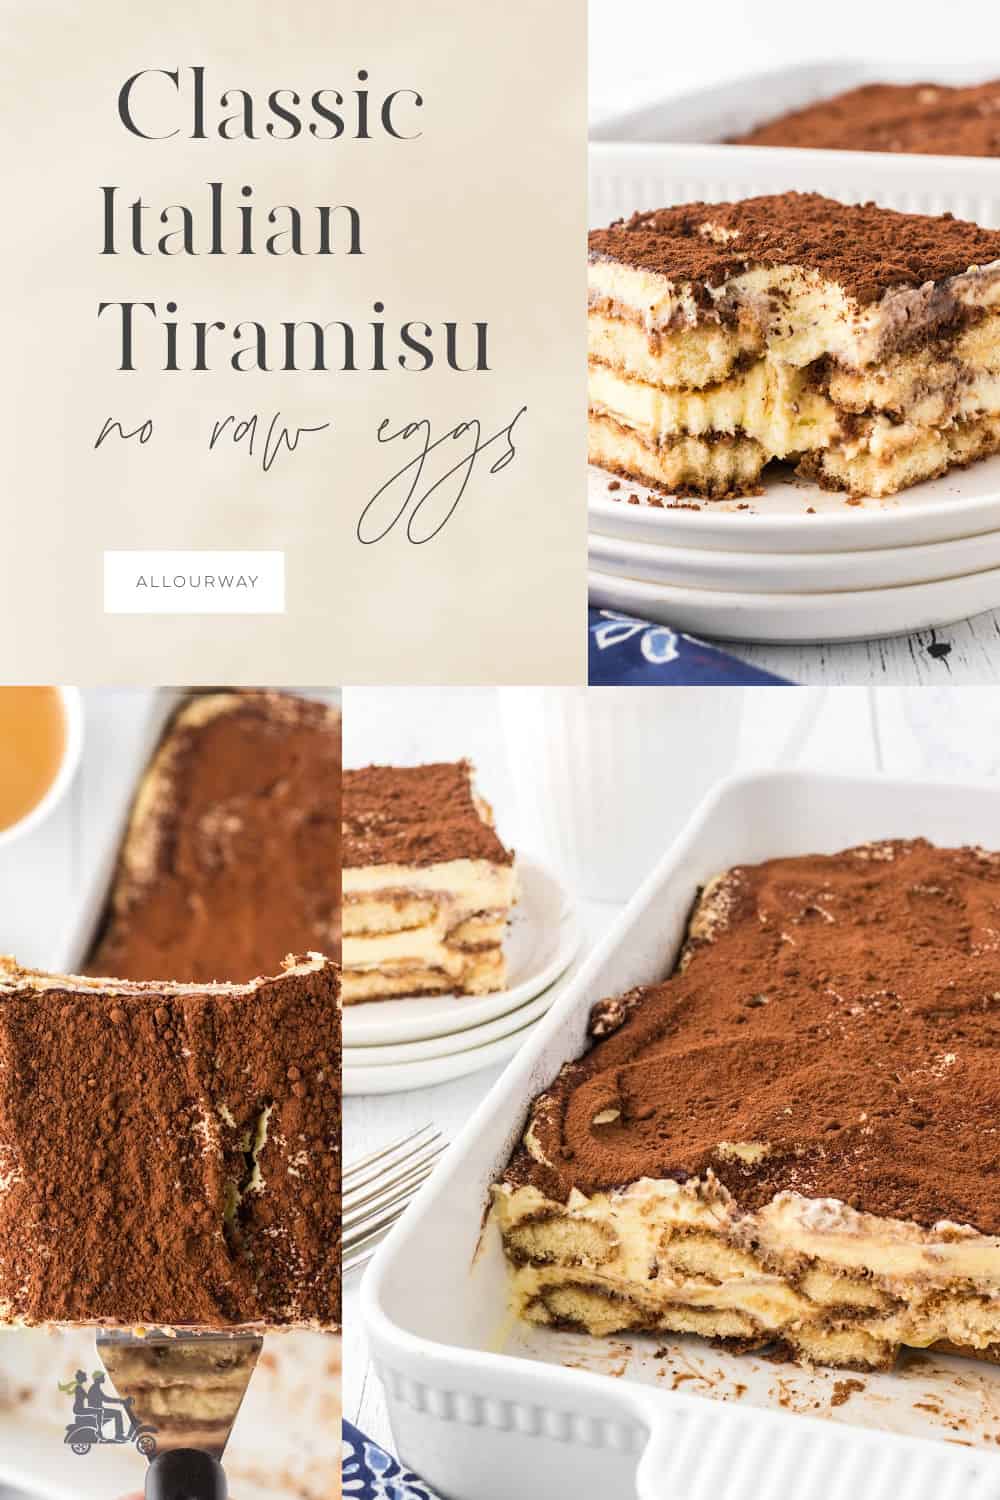 This decadent Italian Tiramisu recipe is made without raw eggs, so there's no need to worry. So get ready to indulge in absolute perfection. Our luxurious Classic Tiramisu recipe has been flawlessly crafted using gentle cooking techniques, resulting in an unforgettable dessert experience.